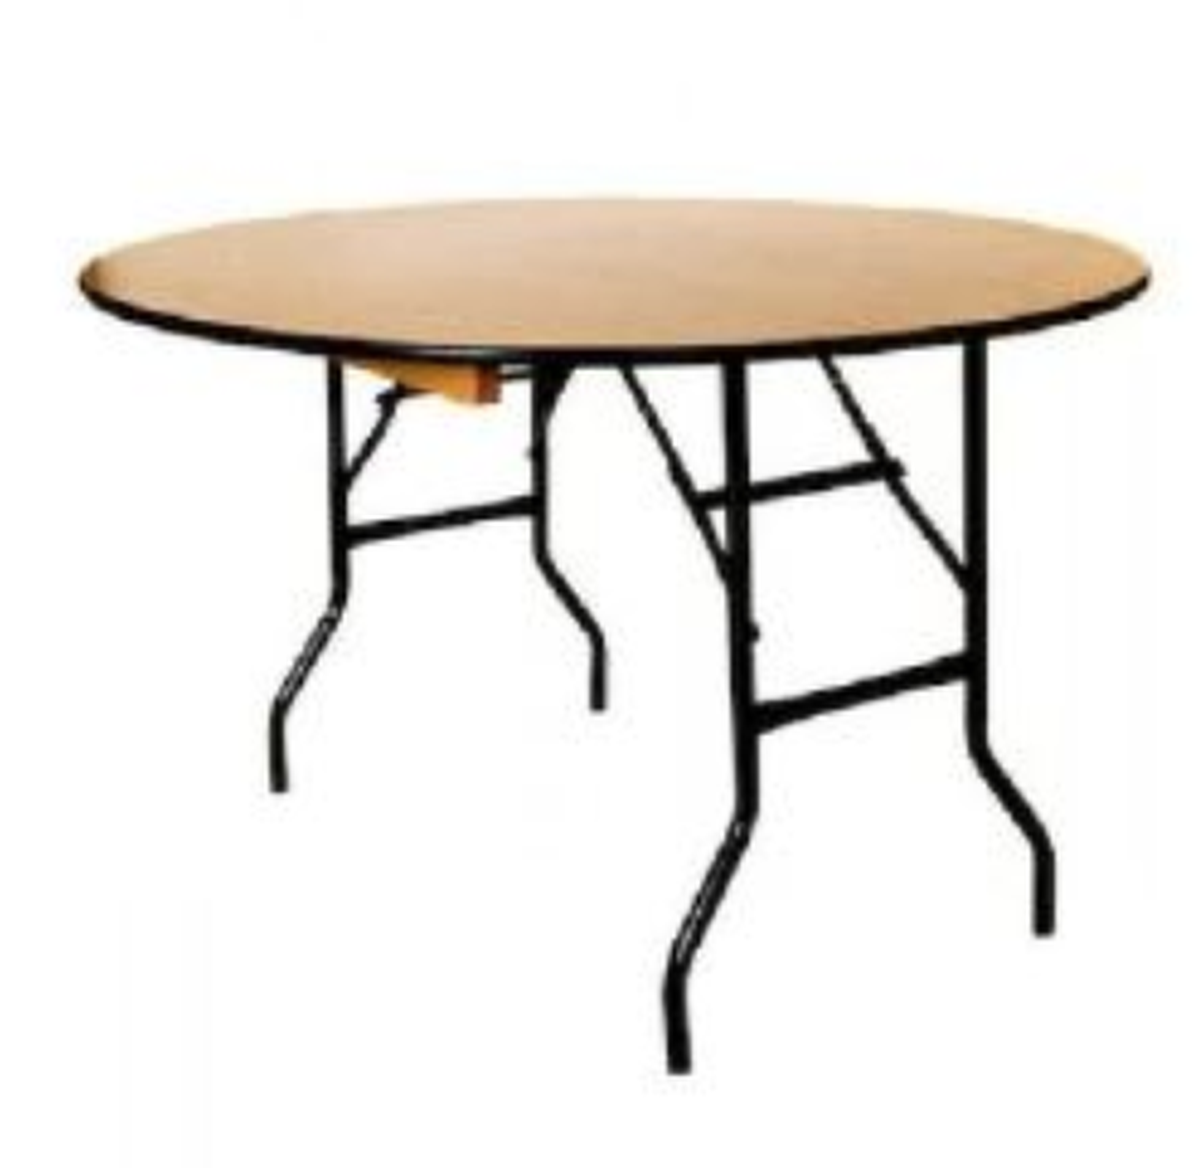 Secondhand Chairs And Tables Round Tables With Folding Legs